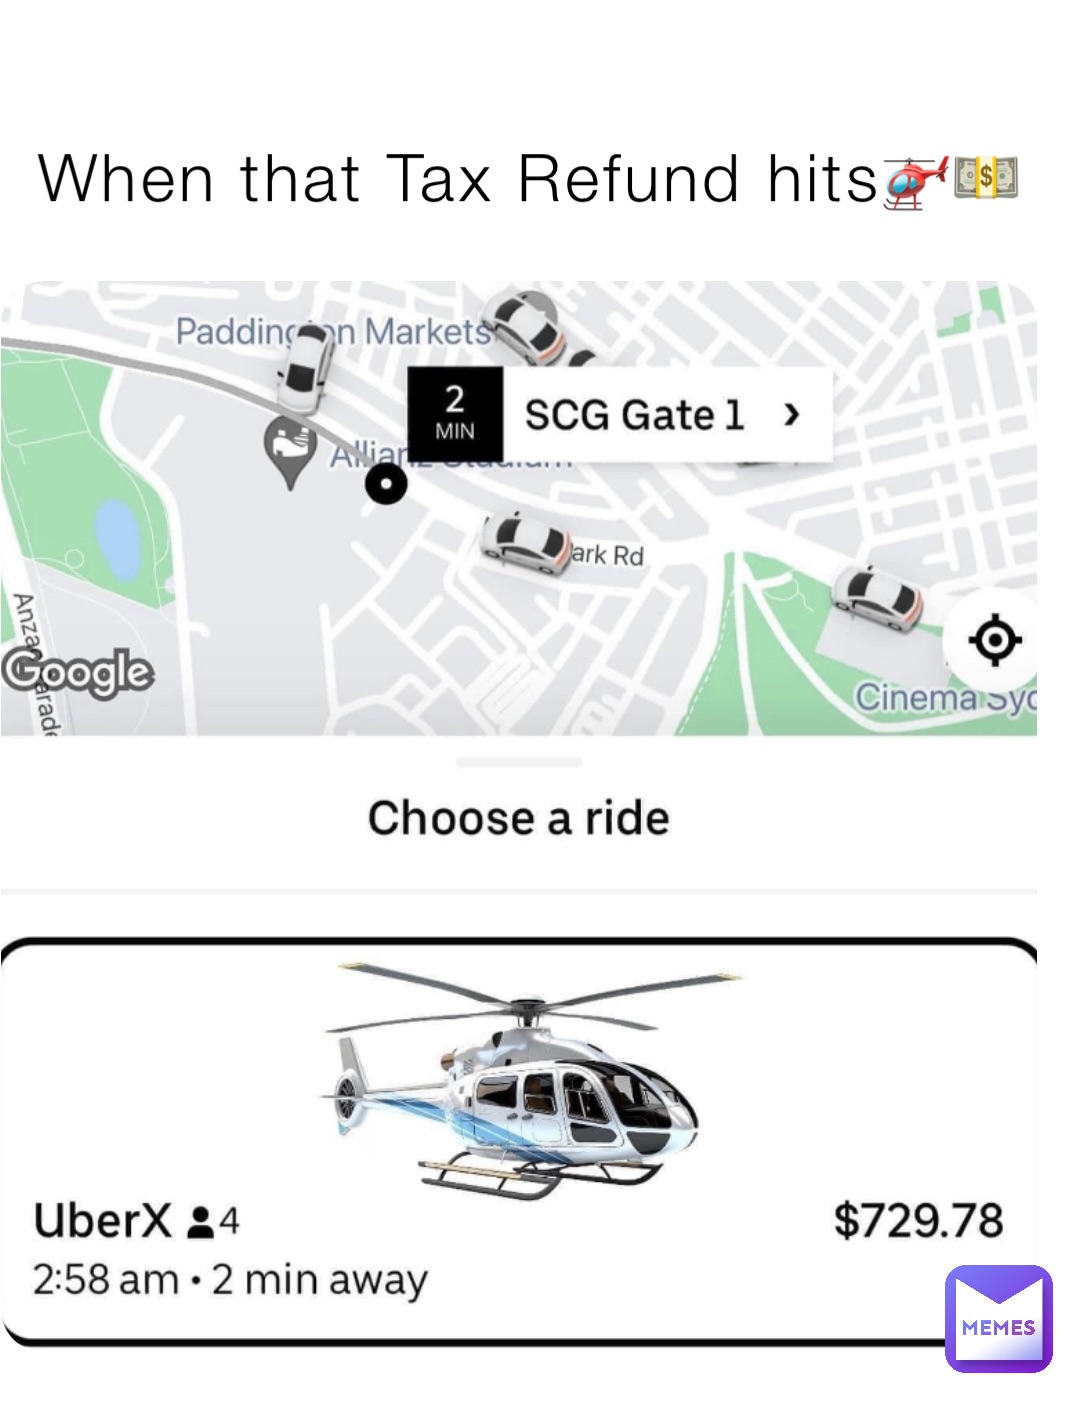 When that Tax Refund hits🚁💵